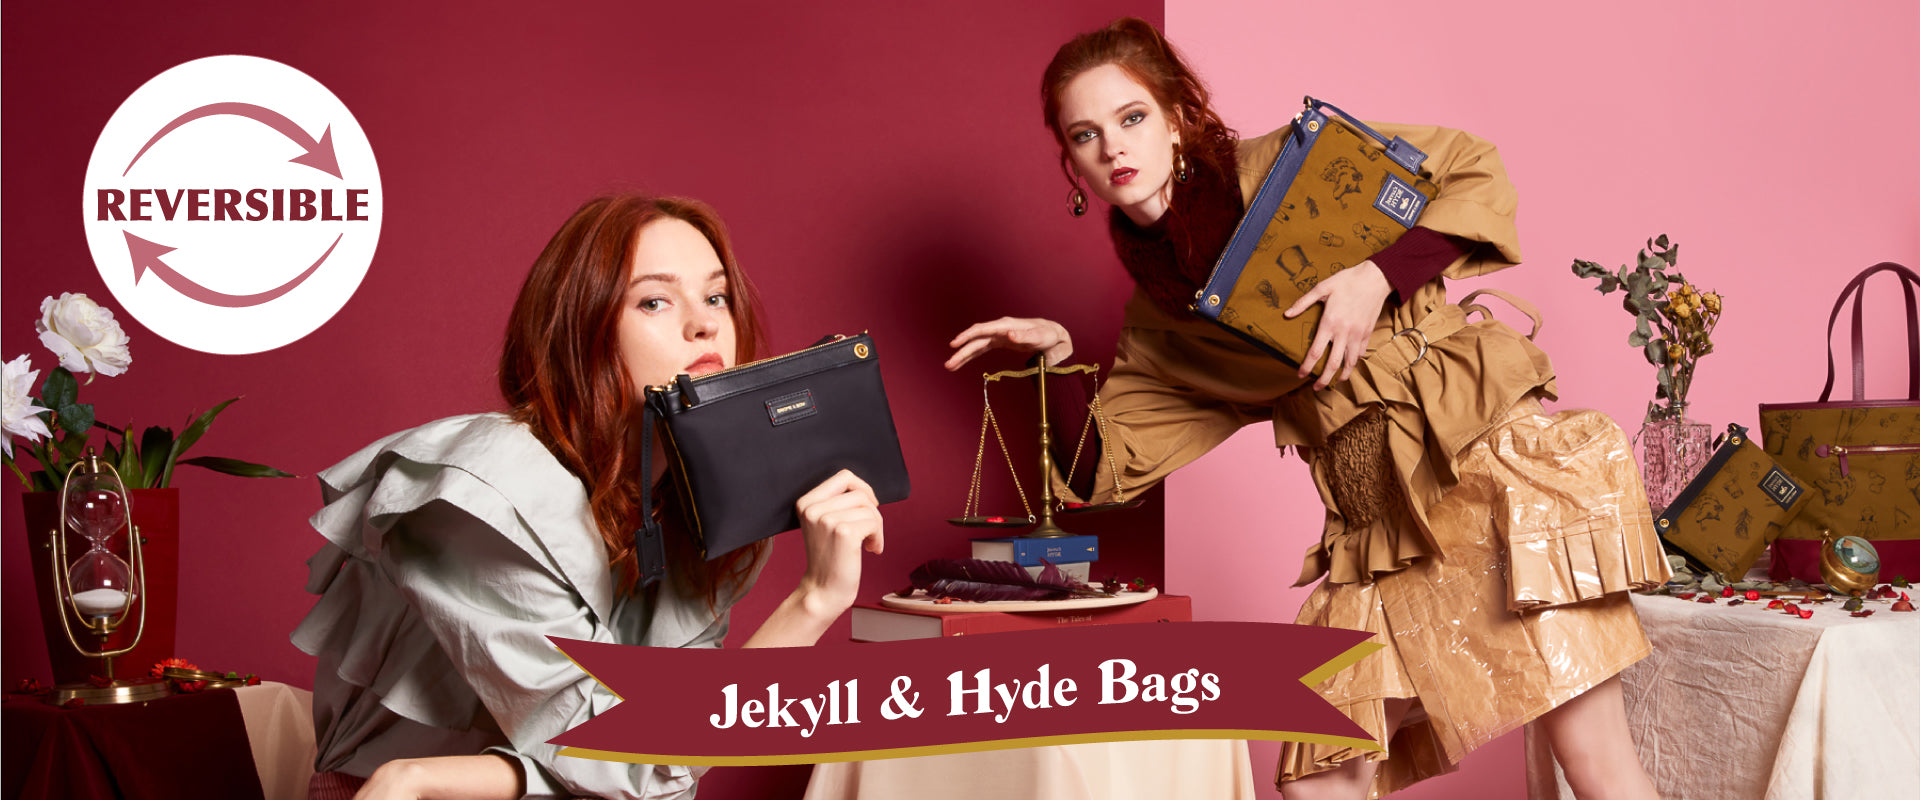 Jekyll-&-Hyde Reversible Bags Gnome & Bow